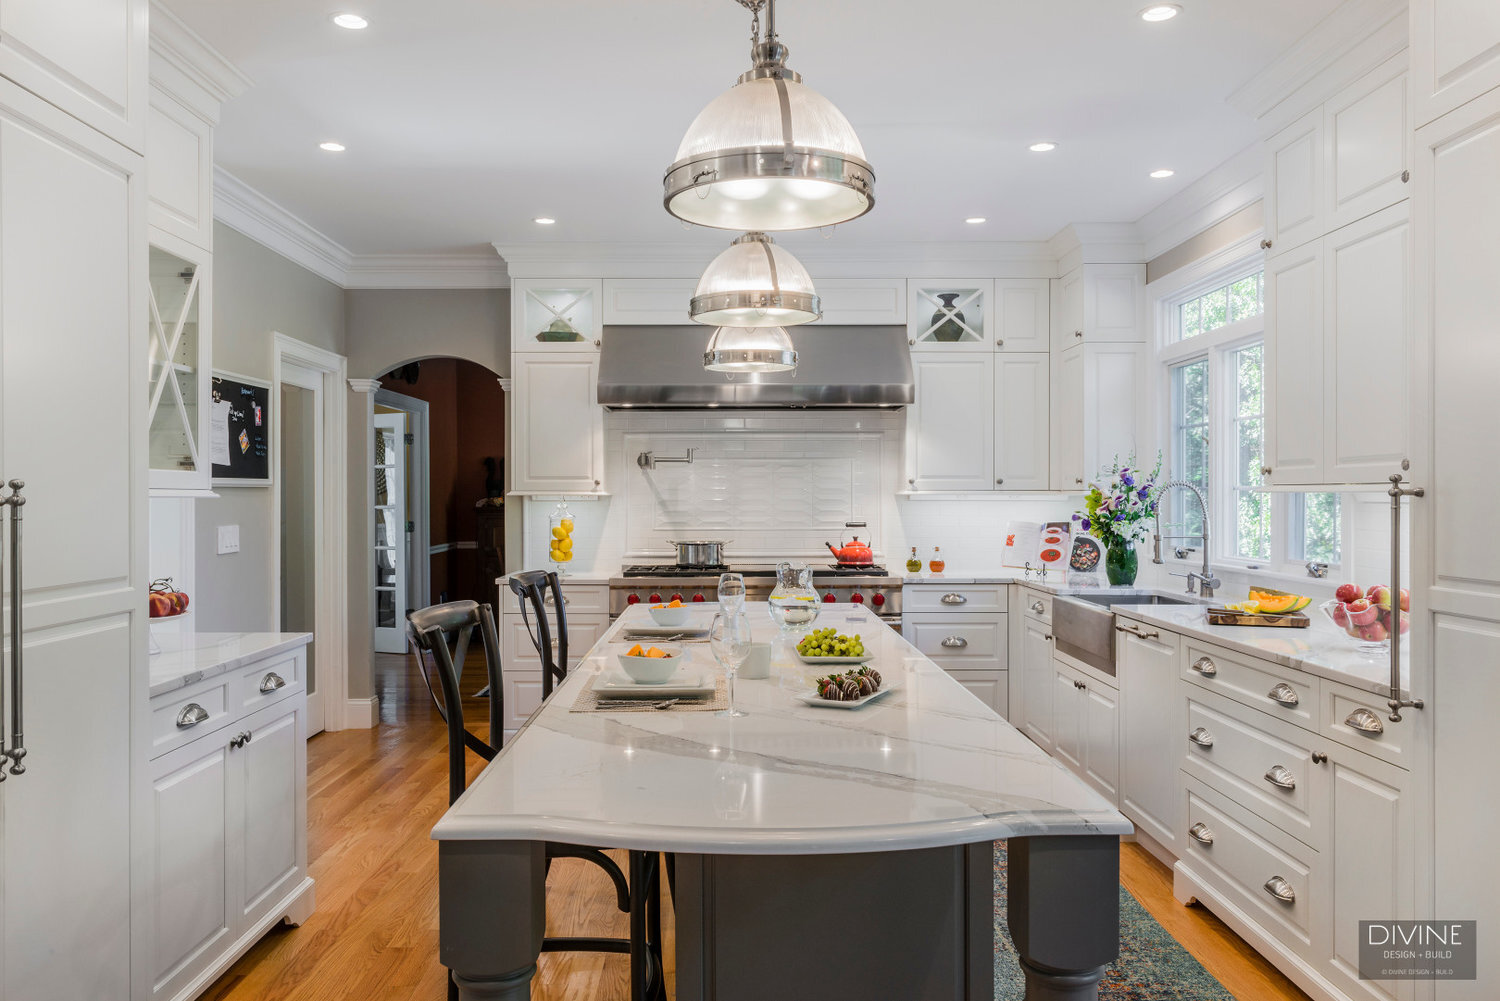  traditional shaker style kitchens with stainless steel farmhouse sink, wolf appliances and chrome pendant lights. Calacatta countertops and medium hardwood floors. Paneled refrigerator. 